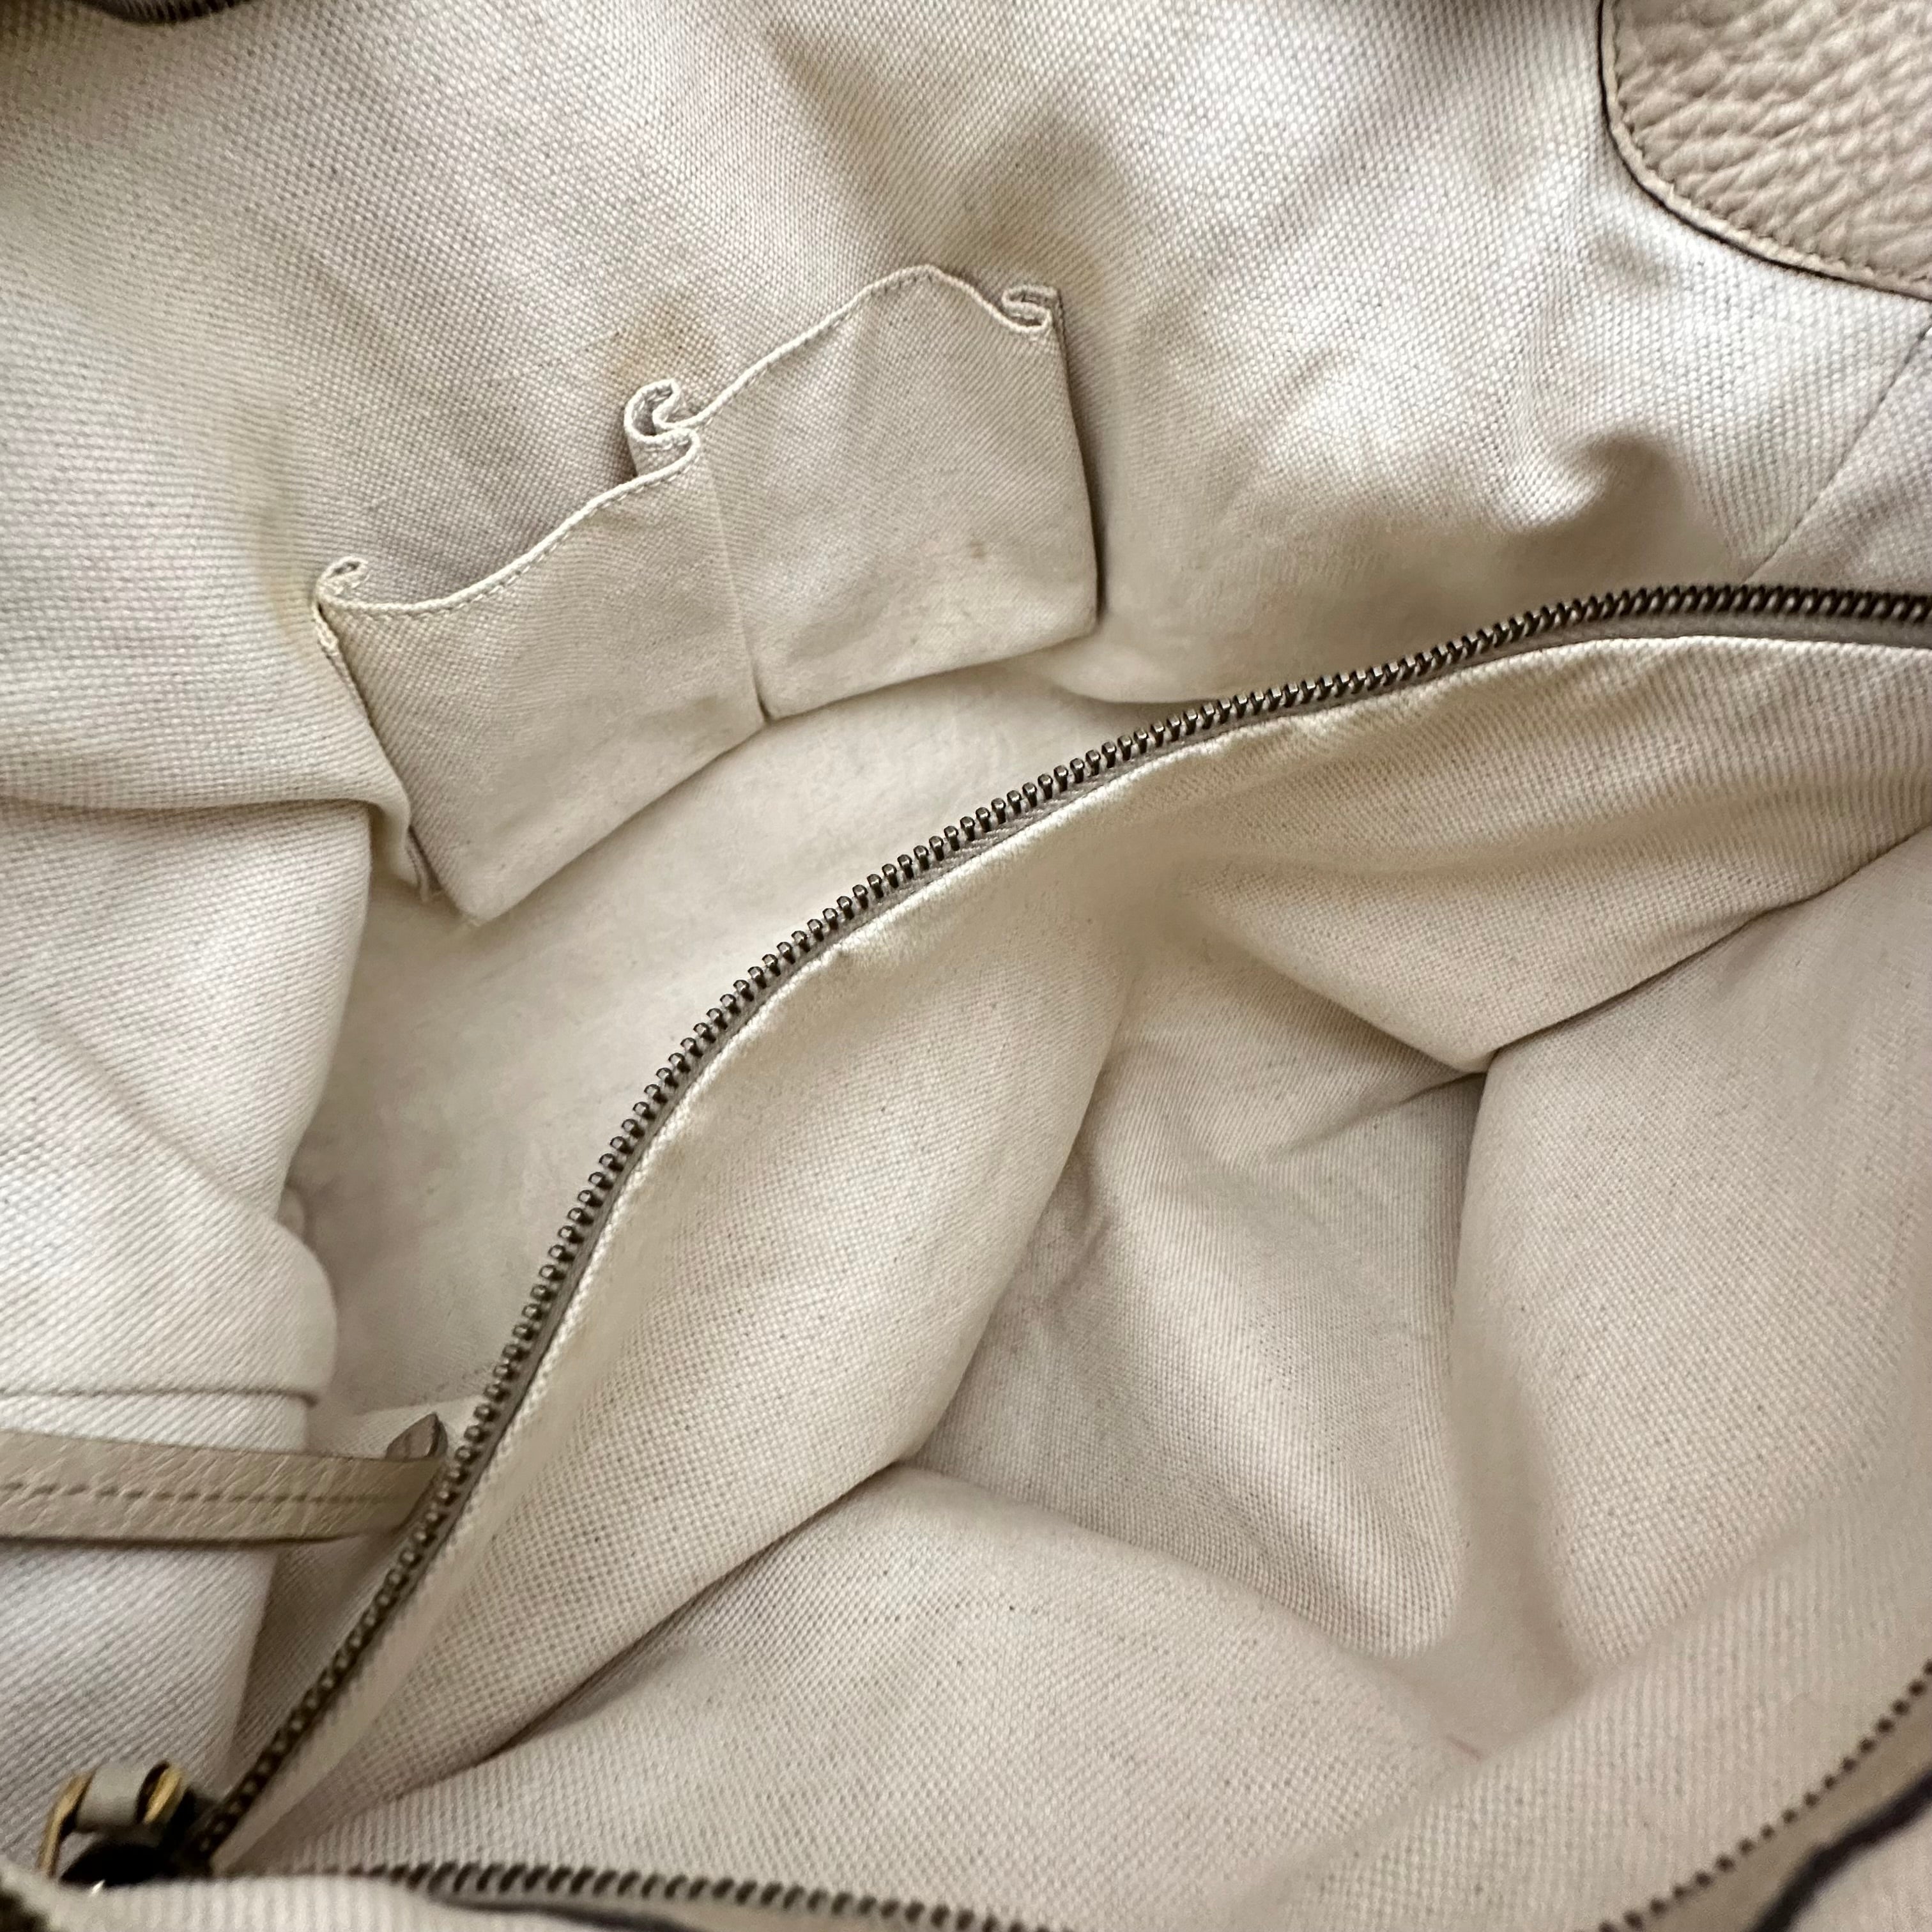 Ivory GG Tote